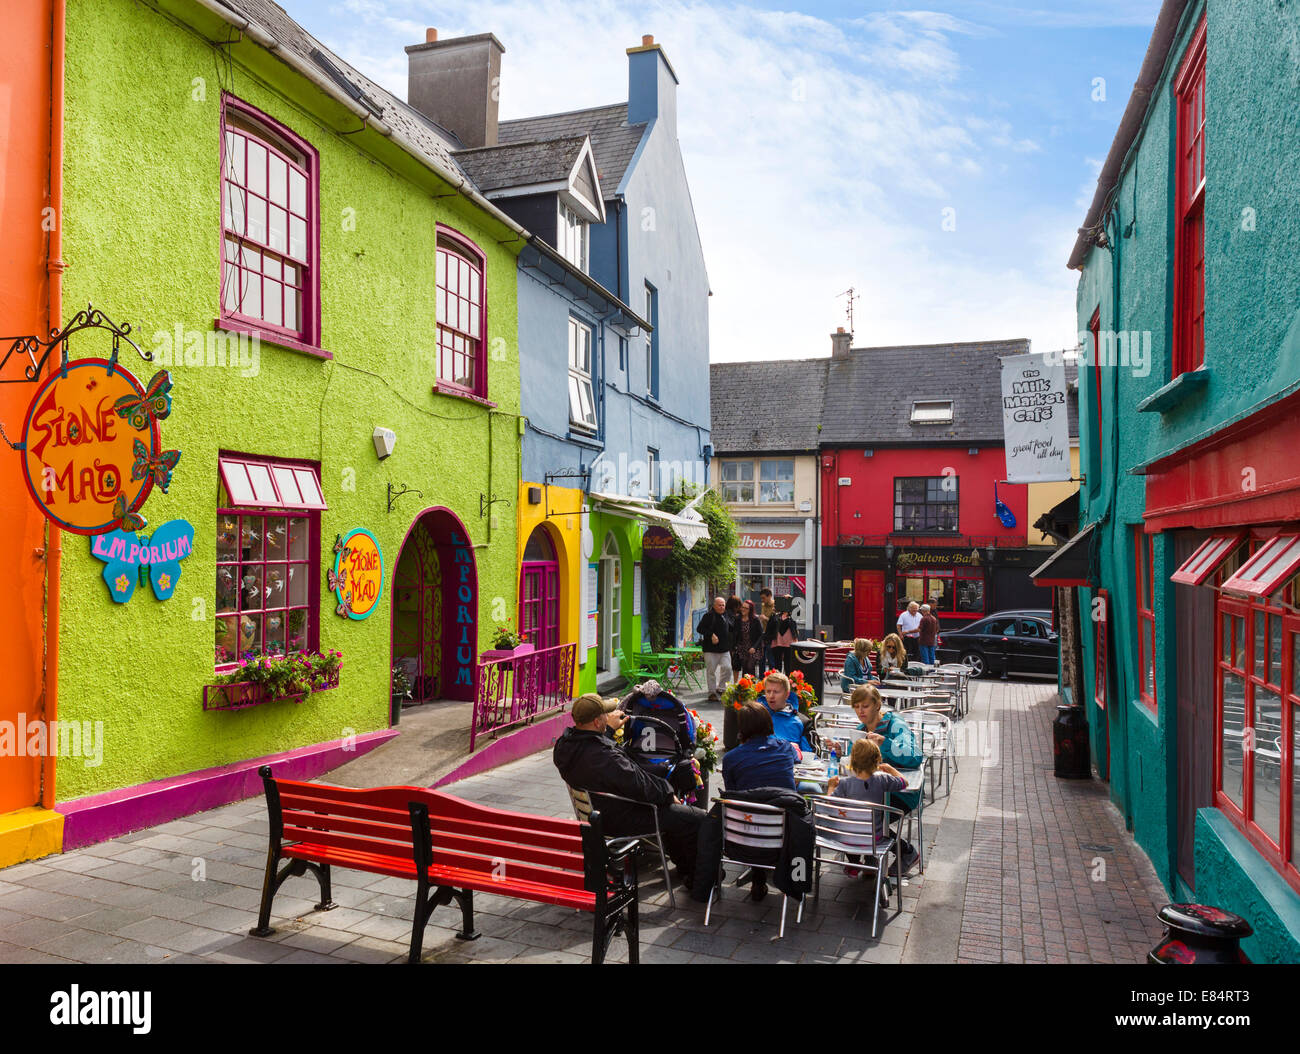 Cafe and shops in Newman's Mall in the town centre, Kinsale, County Cork, Republic of Ireland Stock Photo